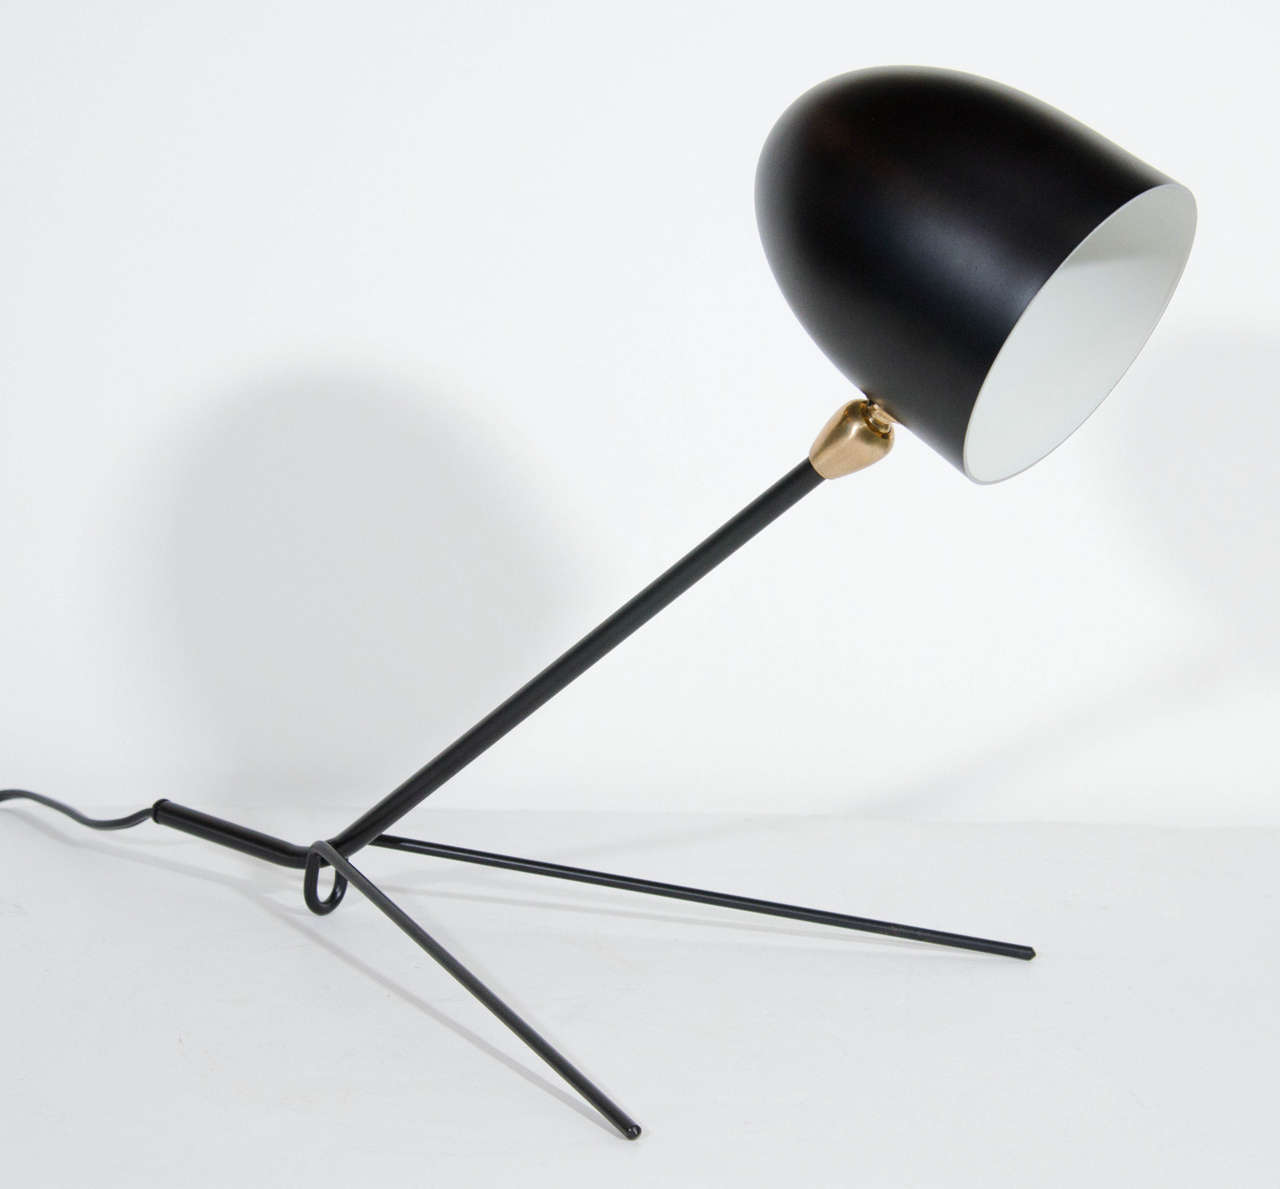 Outstanding modern table lamp with sculpted form in satin black enameled aluminum and iron. The lamp has pivoting shade with stylized brass fitting. It features a leaning stem design with and 